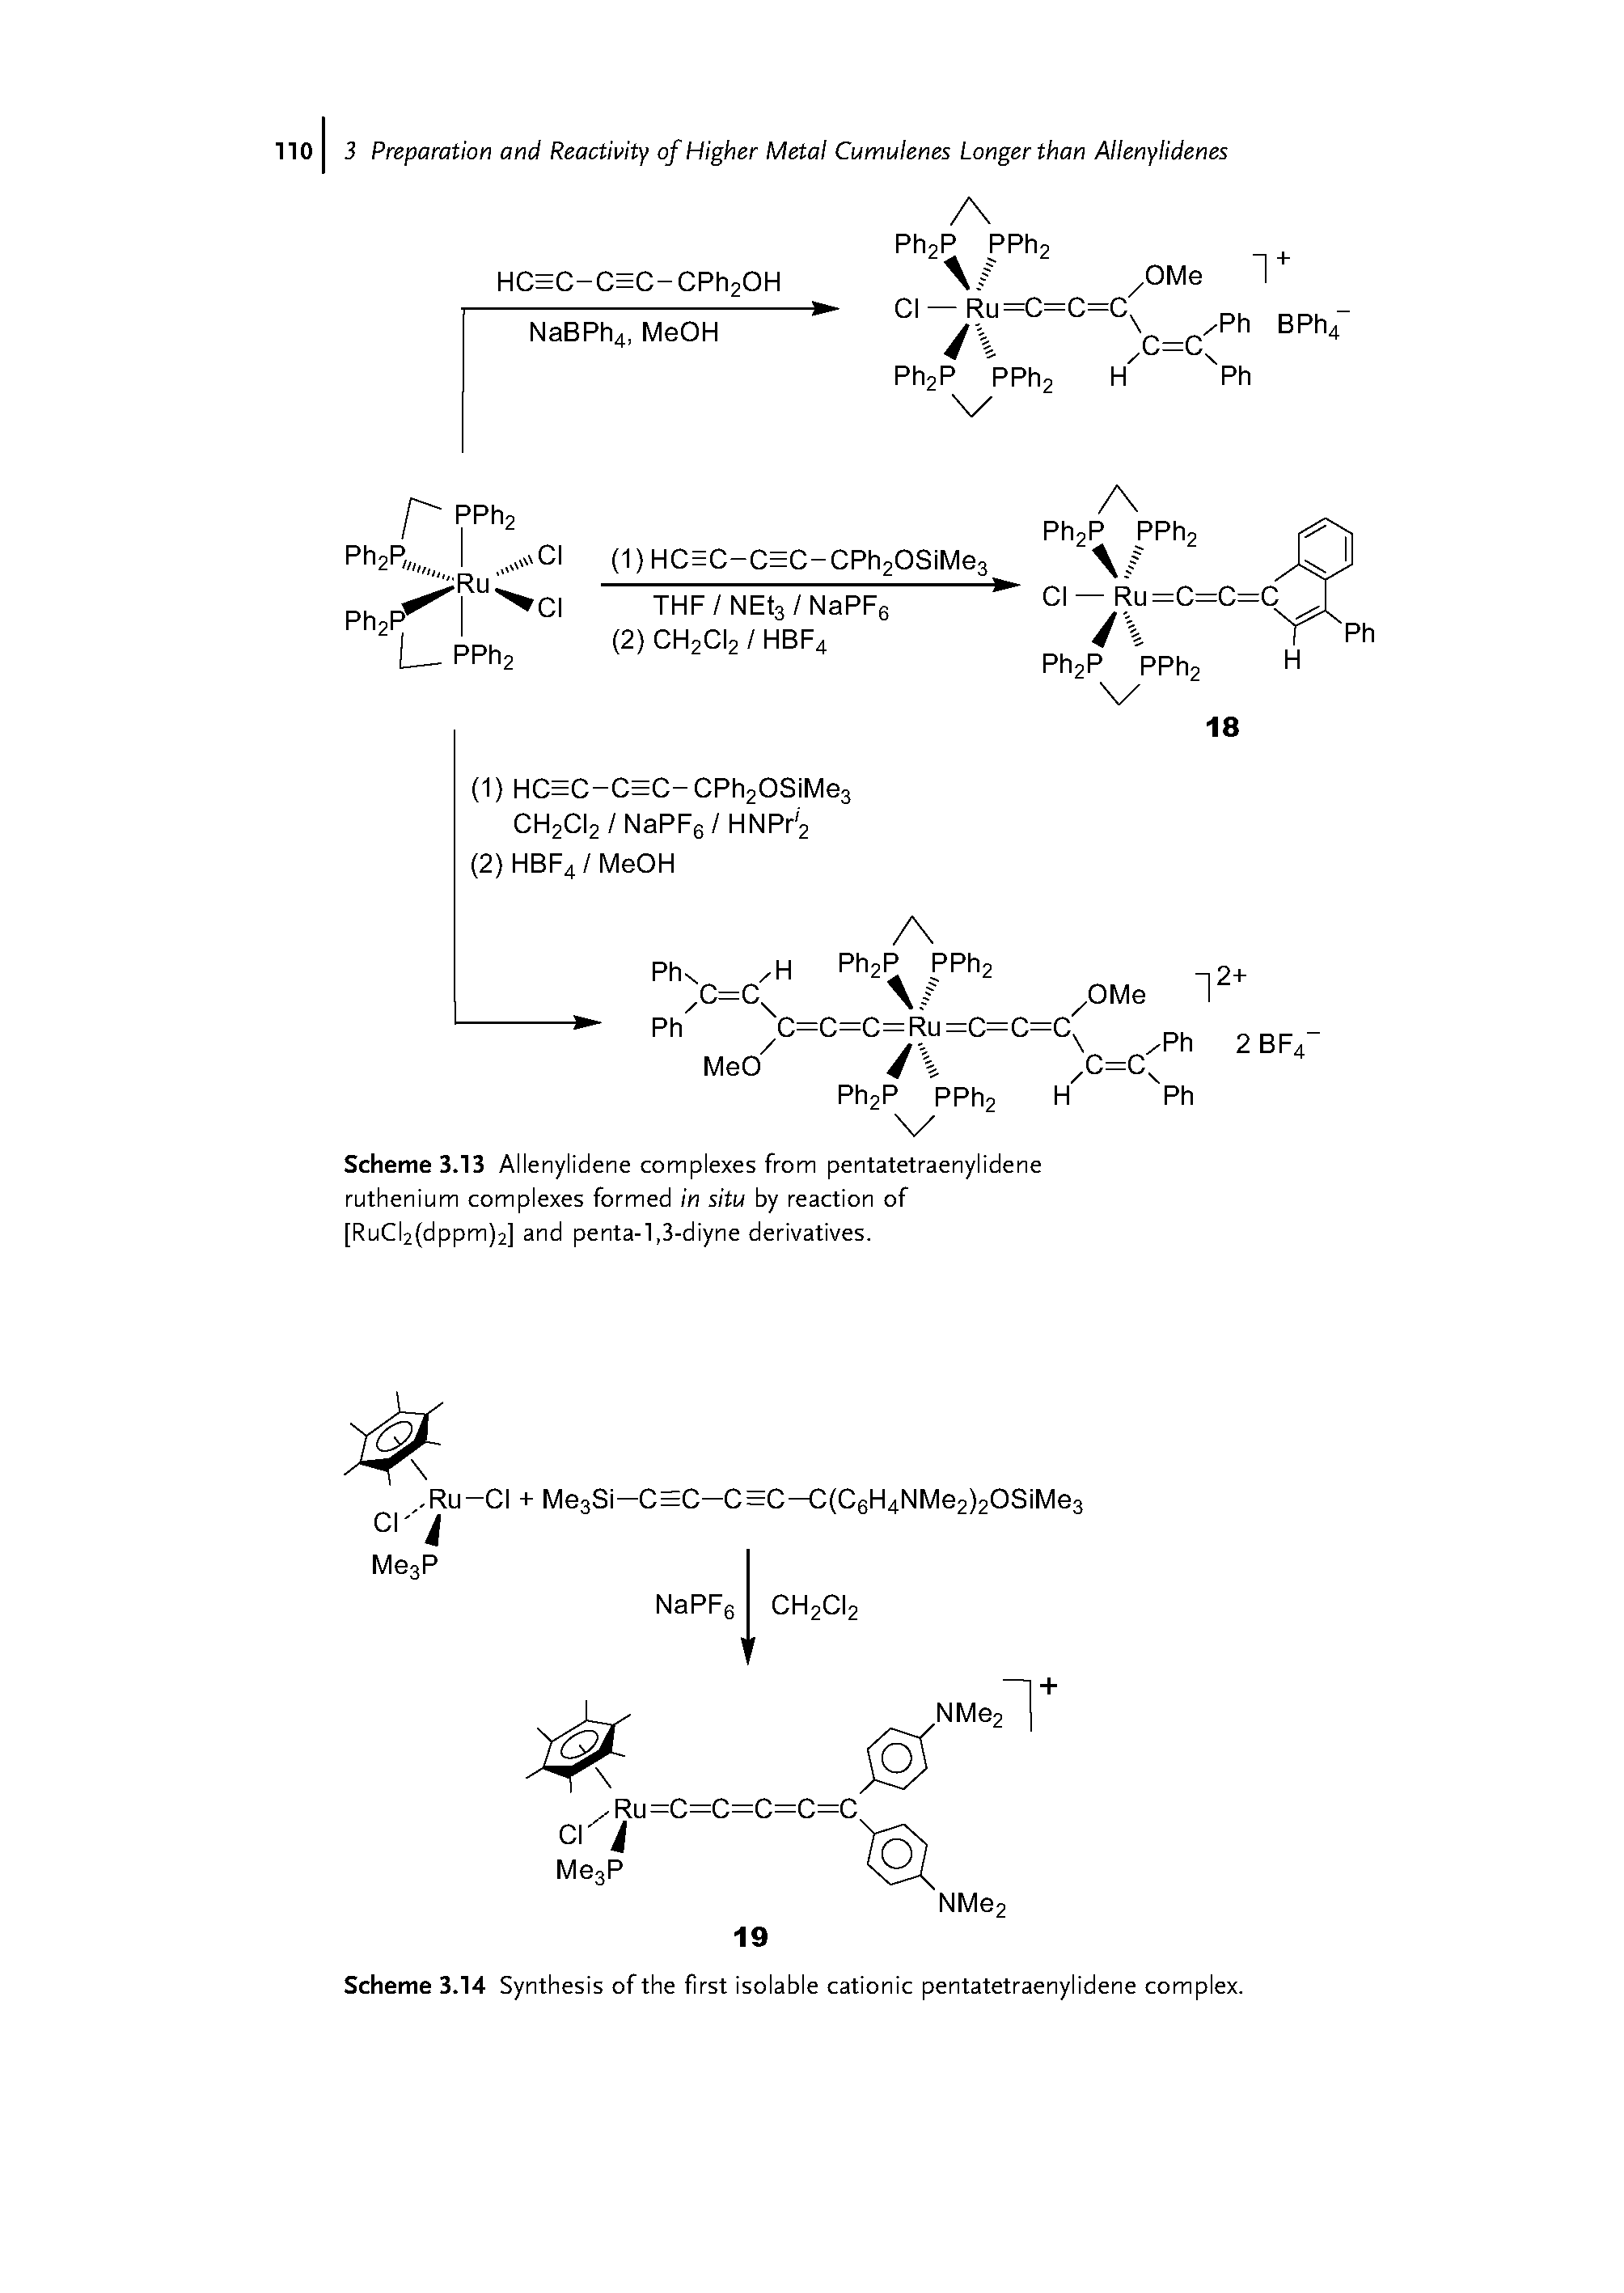 Scheme 3.14 Synthesis of the first isolable cationic pentatetraenylidene complex.